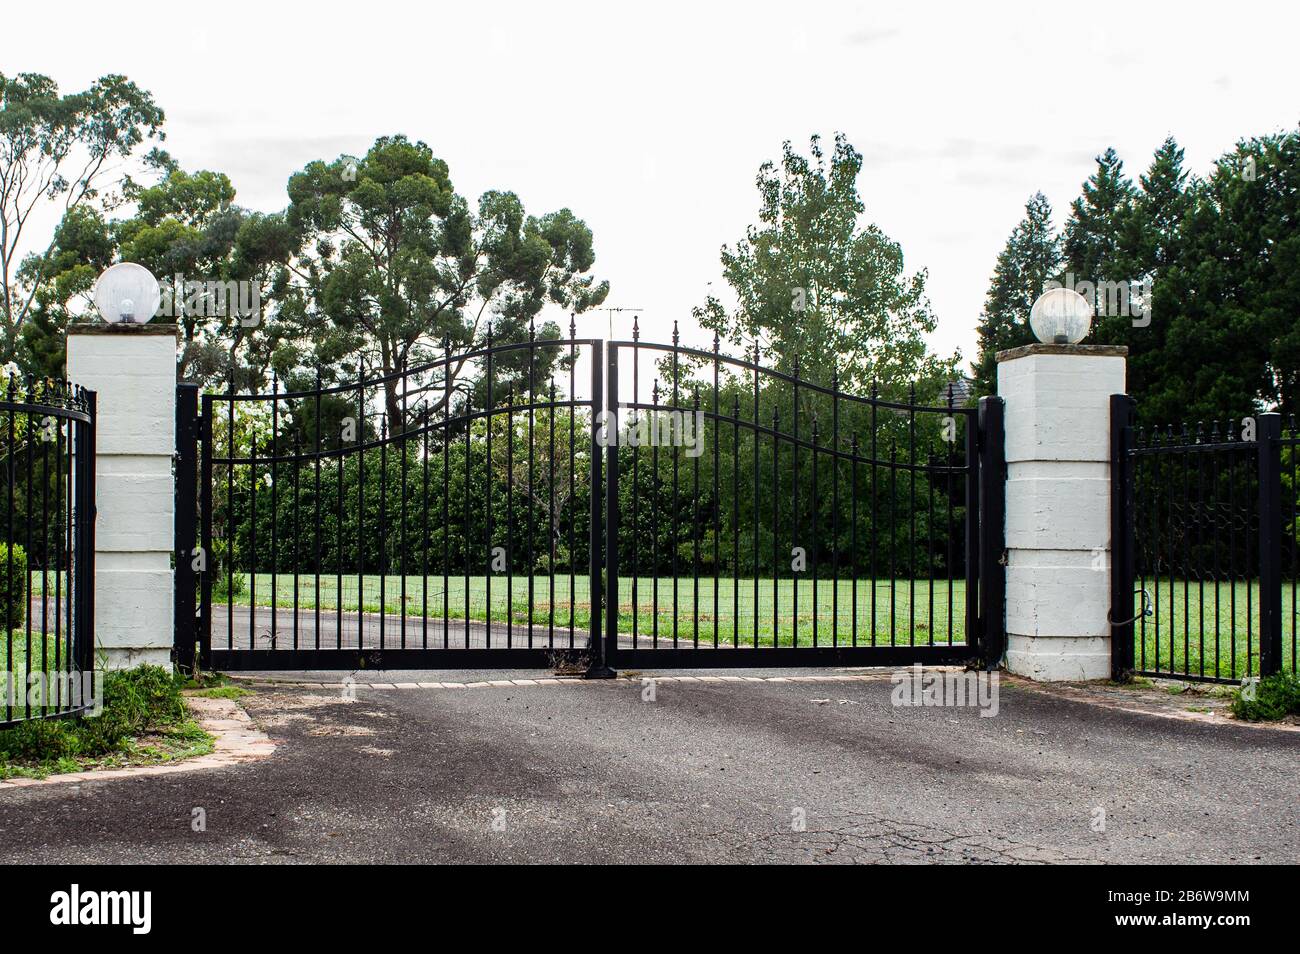 Black metal wrought iron driveway property entrance gates  set in brick fence, lights, green grass, garden trees Stock Photo